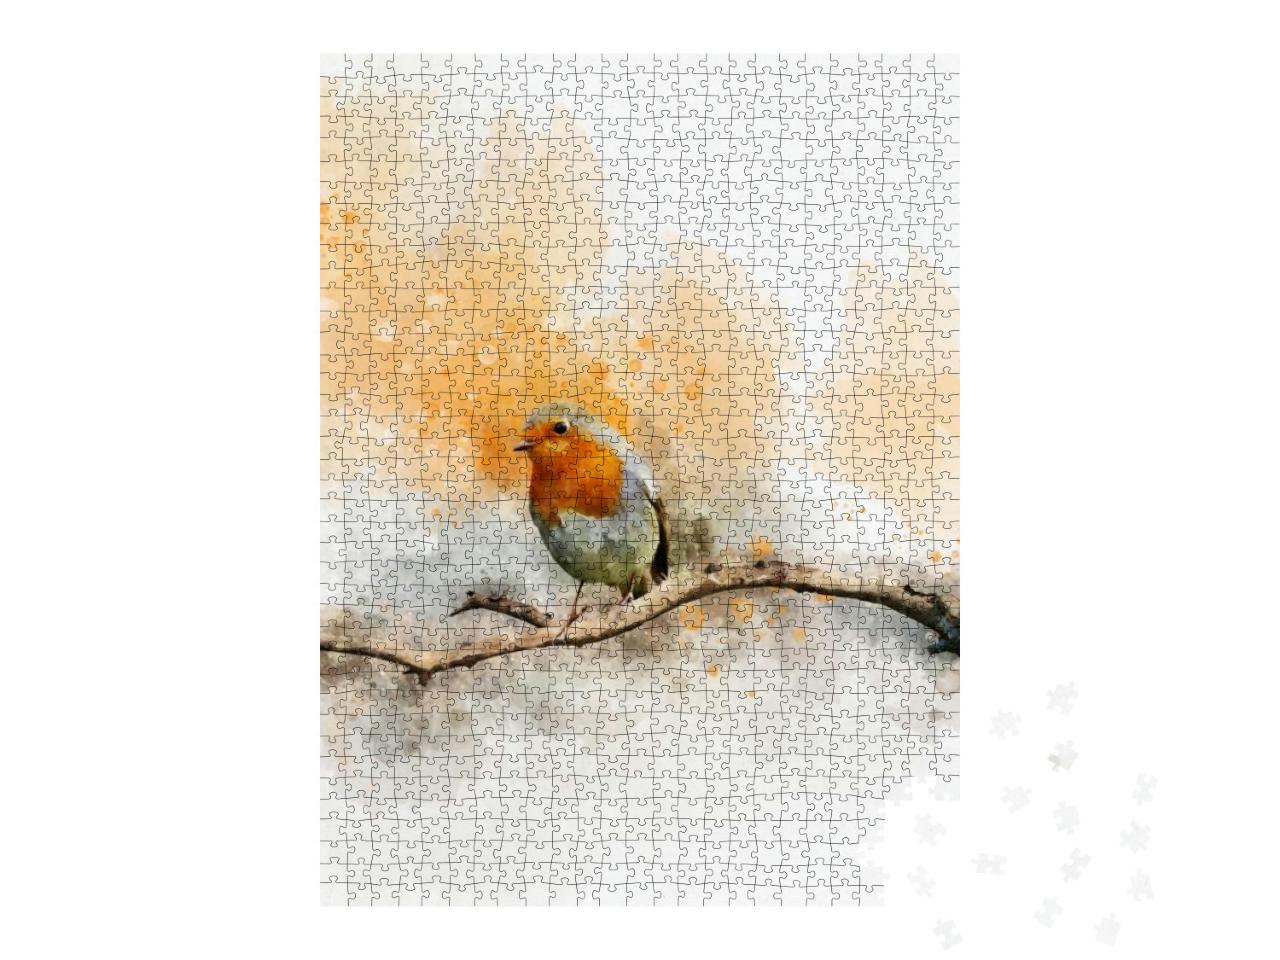 Watercolor Robin Redbreast. Hand Painted Bird Isolated on... Jigsaw Puzzle with 1000 pieces